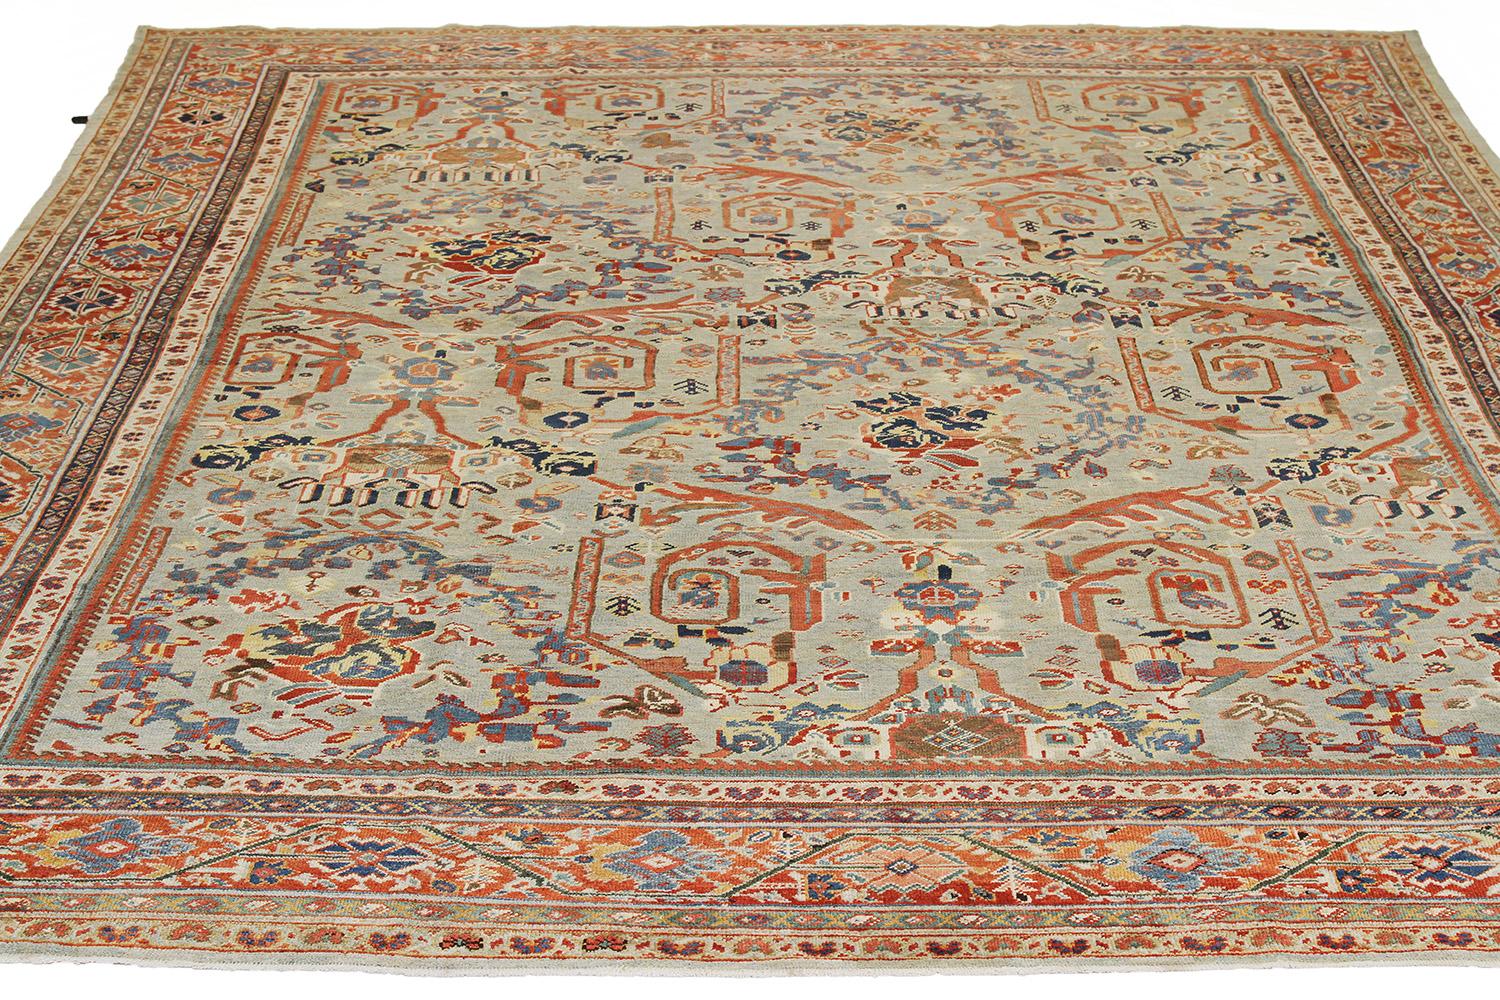 Antique handmade Persian area rug from high-quality sheep’s wool and colored with eco-friendly vegetable dyes that are proven safe for humans and pets alike. It’s a Classic Sultanabad design showcasing a regal ivory field with prominent Herati